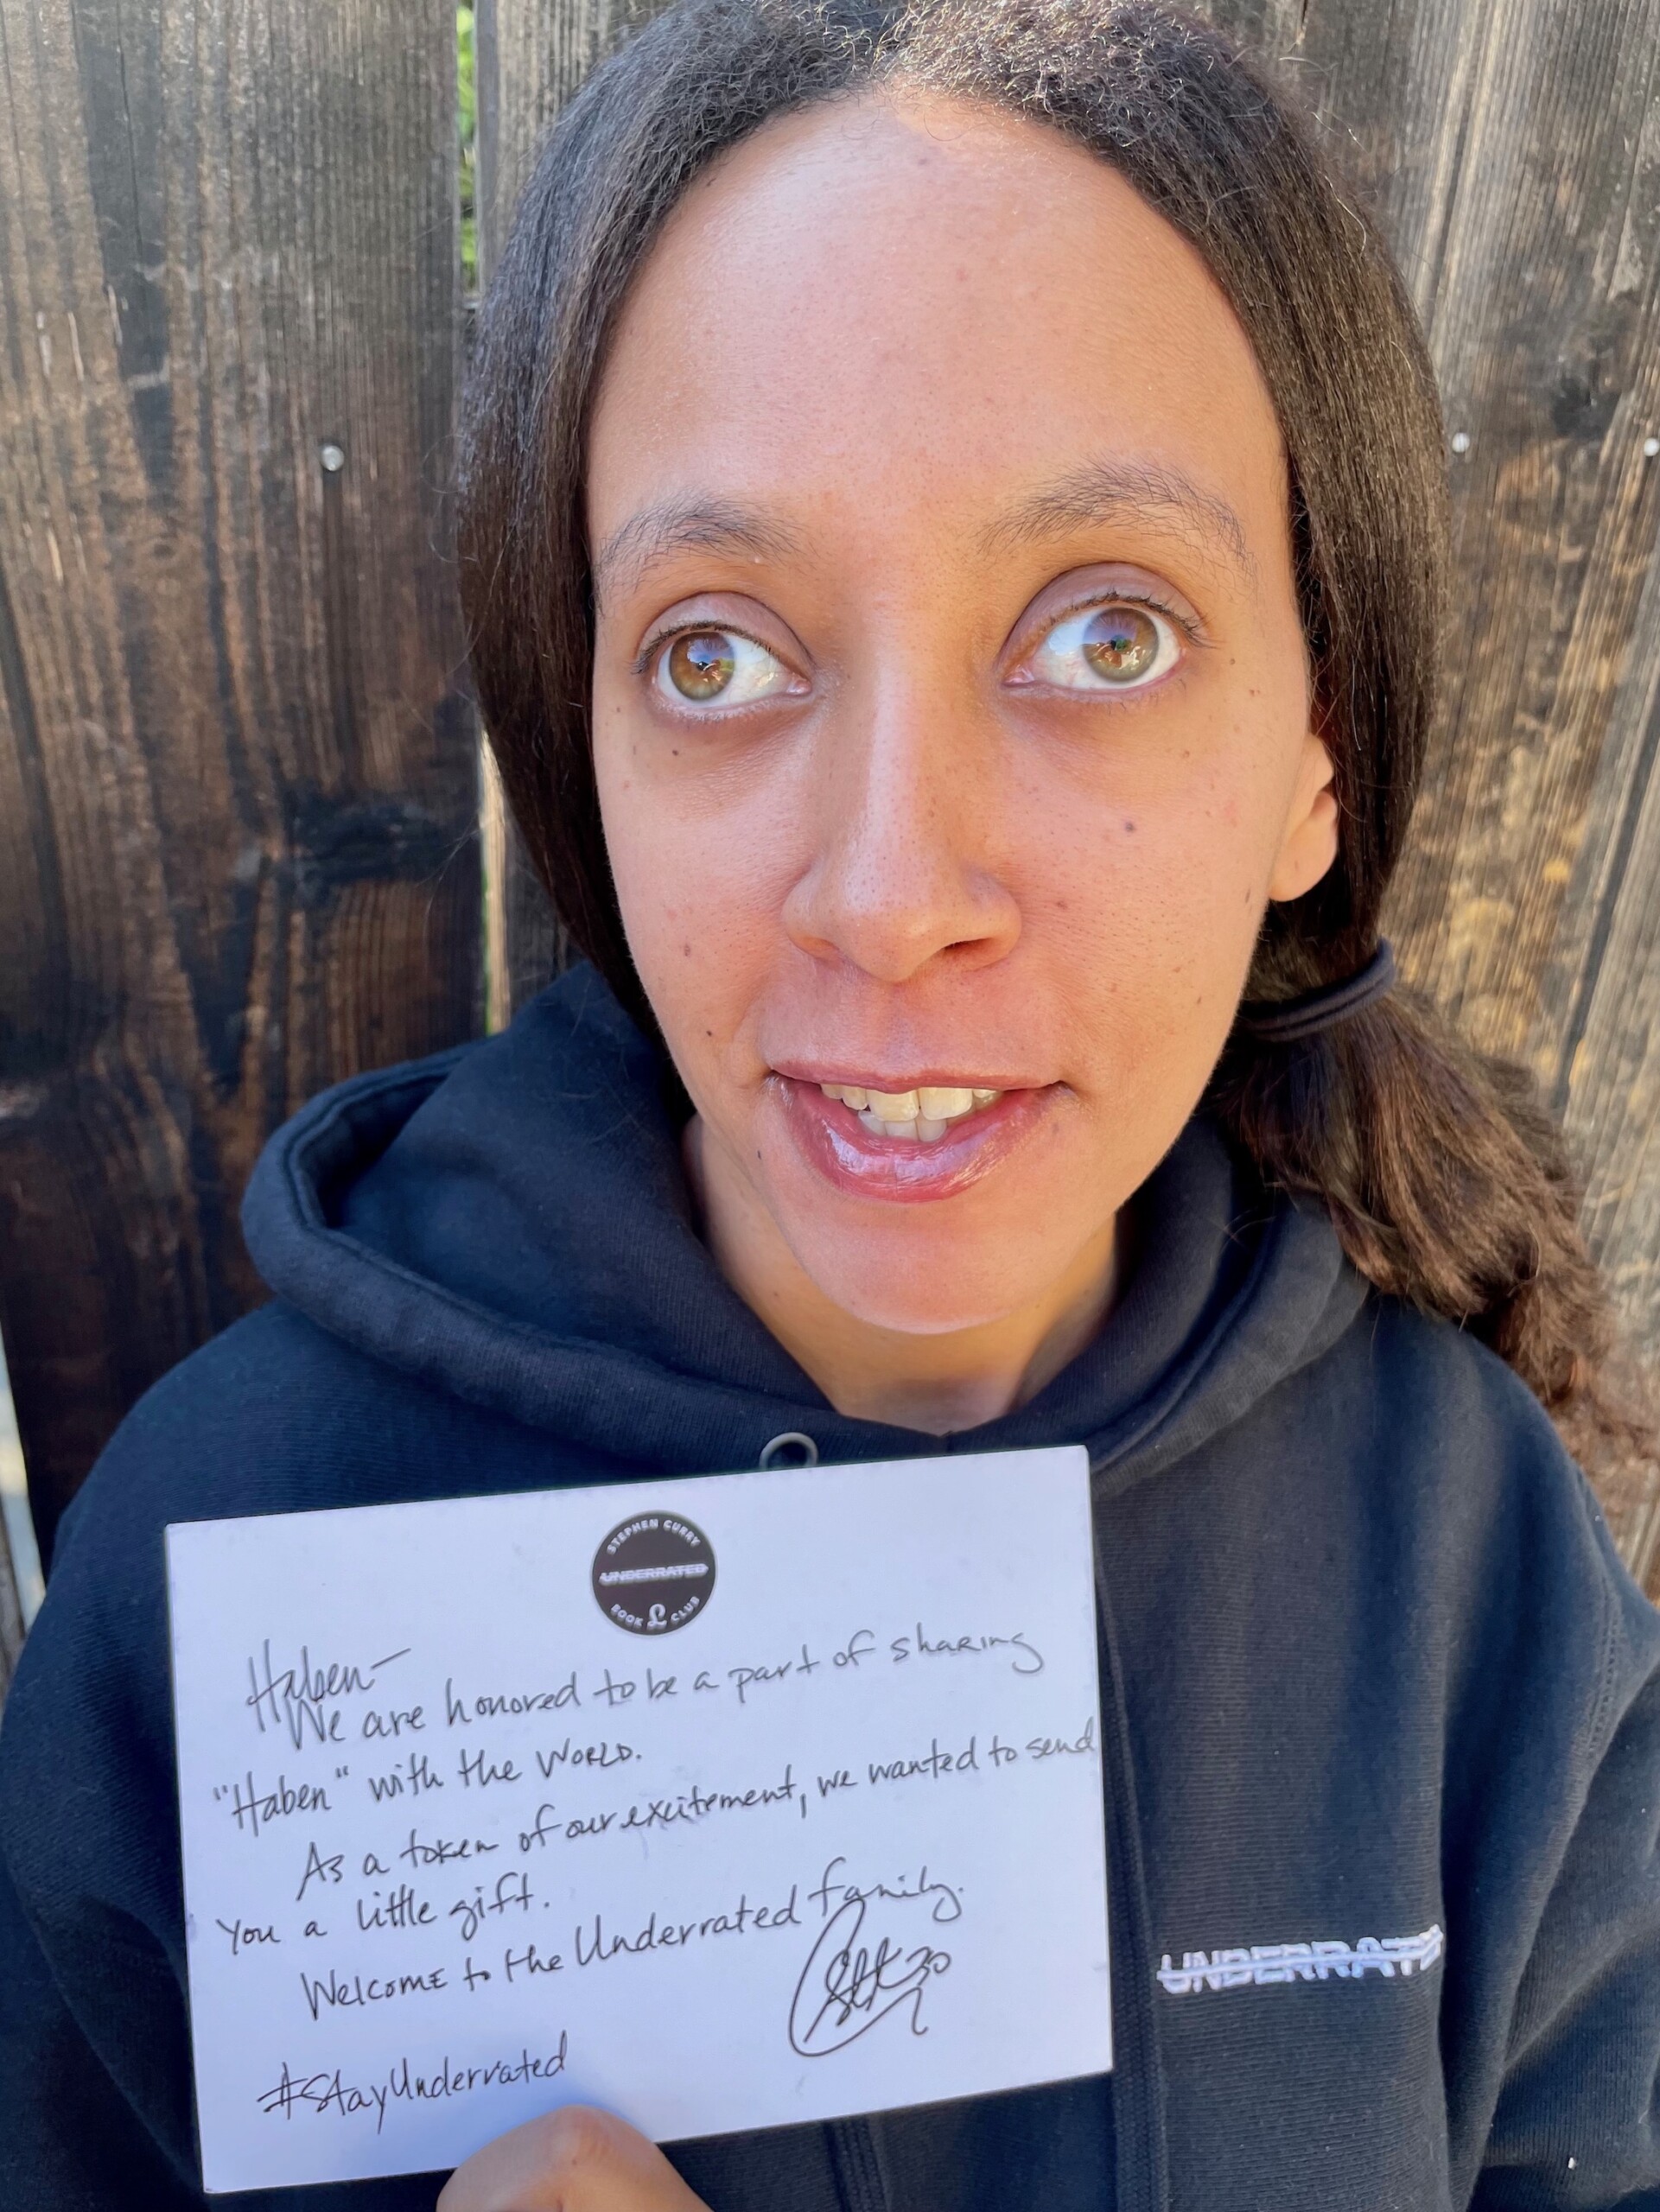 I’m wearing a black hoodie with the book club’s name Underrated on the left side. I’m smiling and holding up the card. A dark brown fence is in the background.